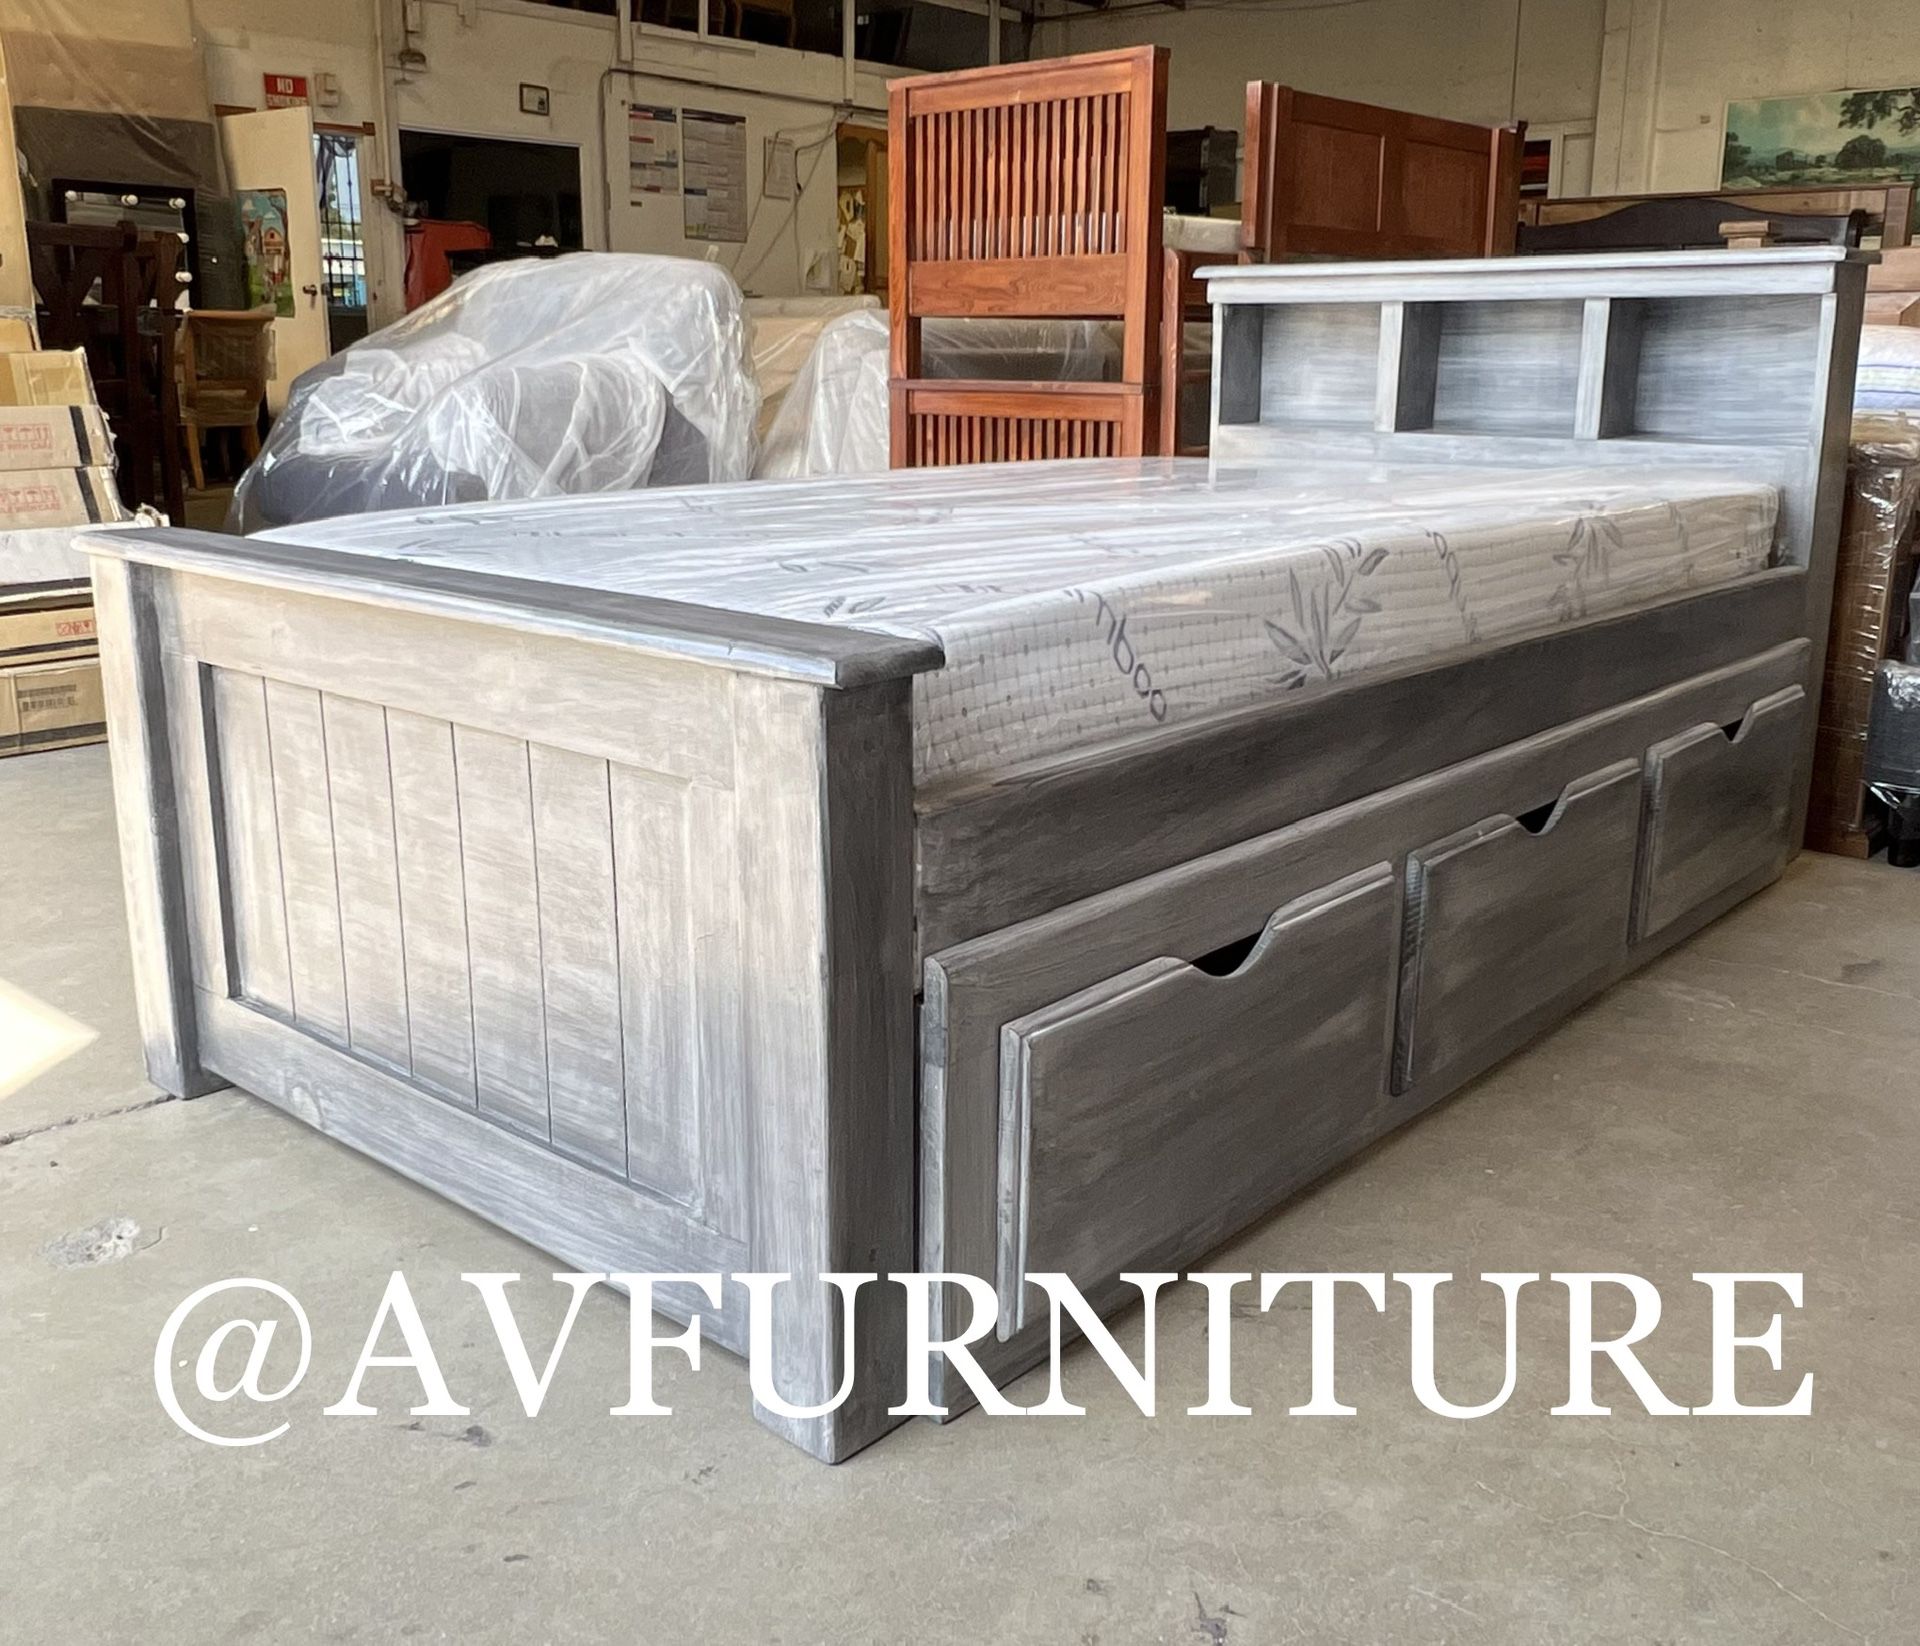 Twin Bed W Drawers And Foam Mattress 